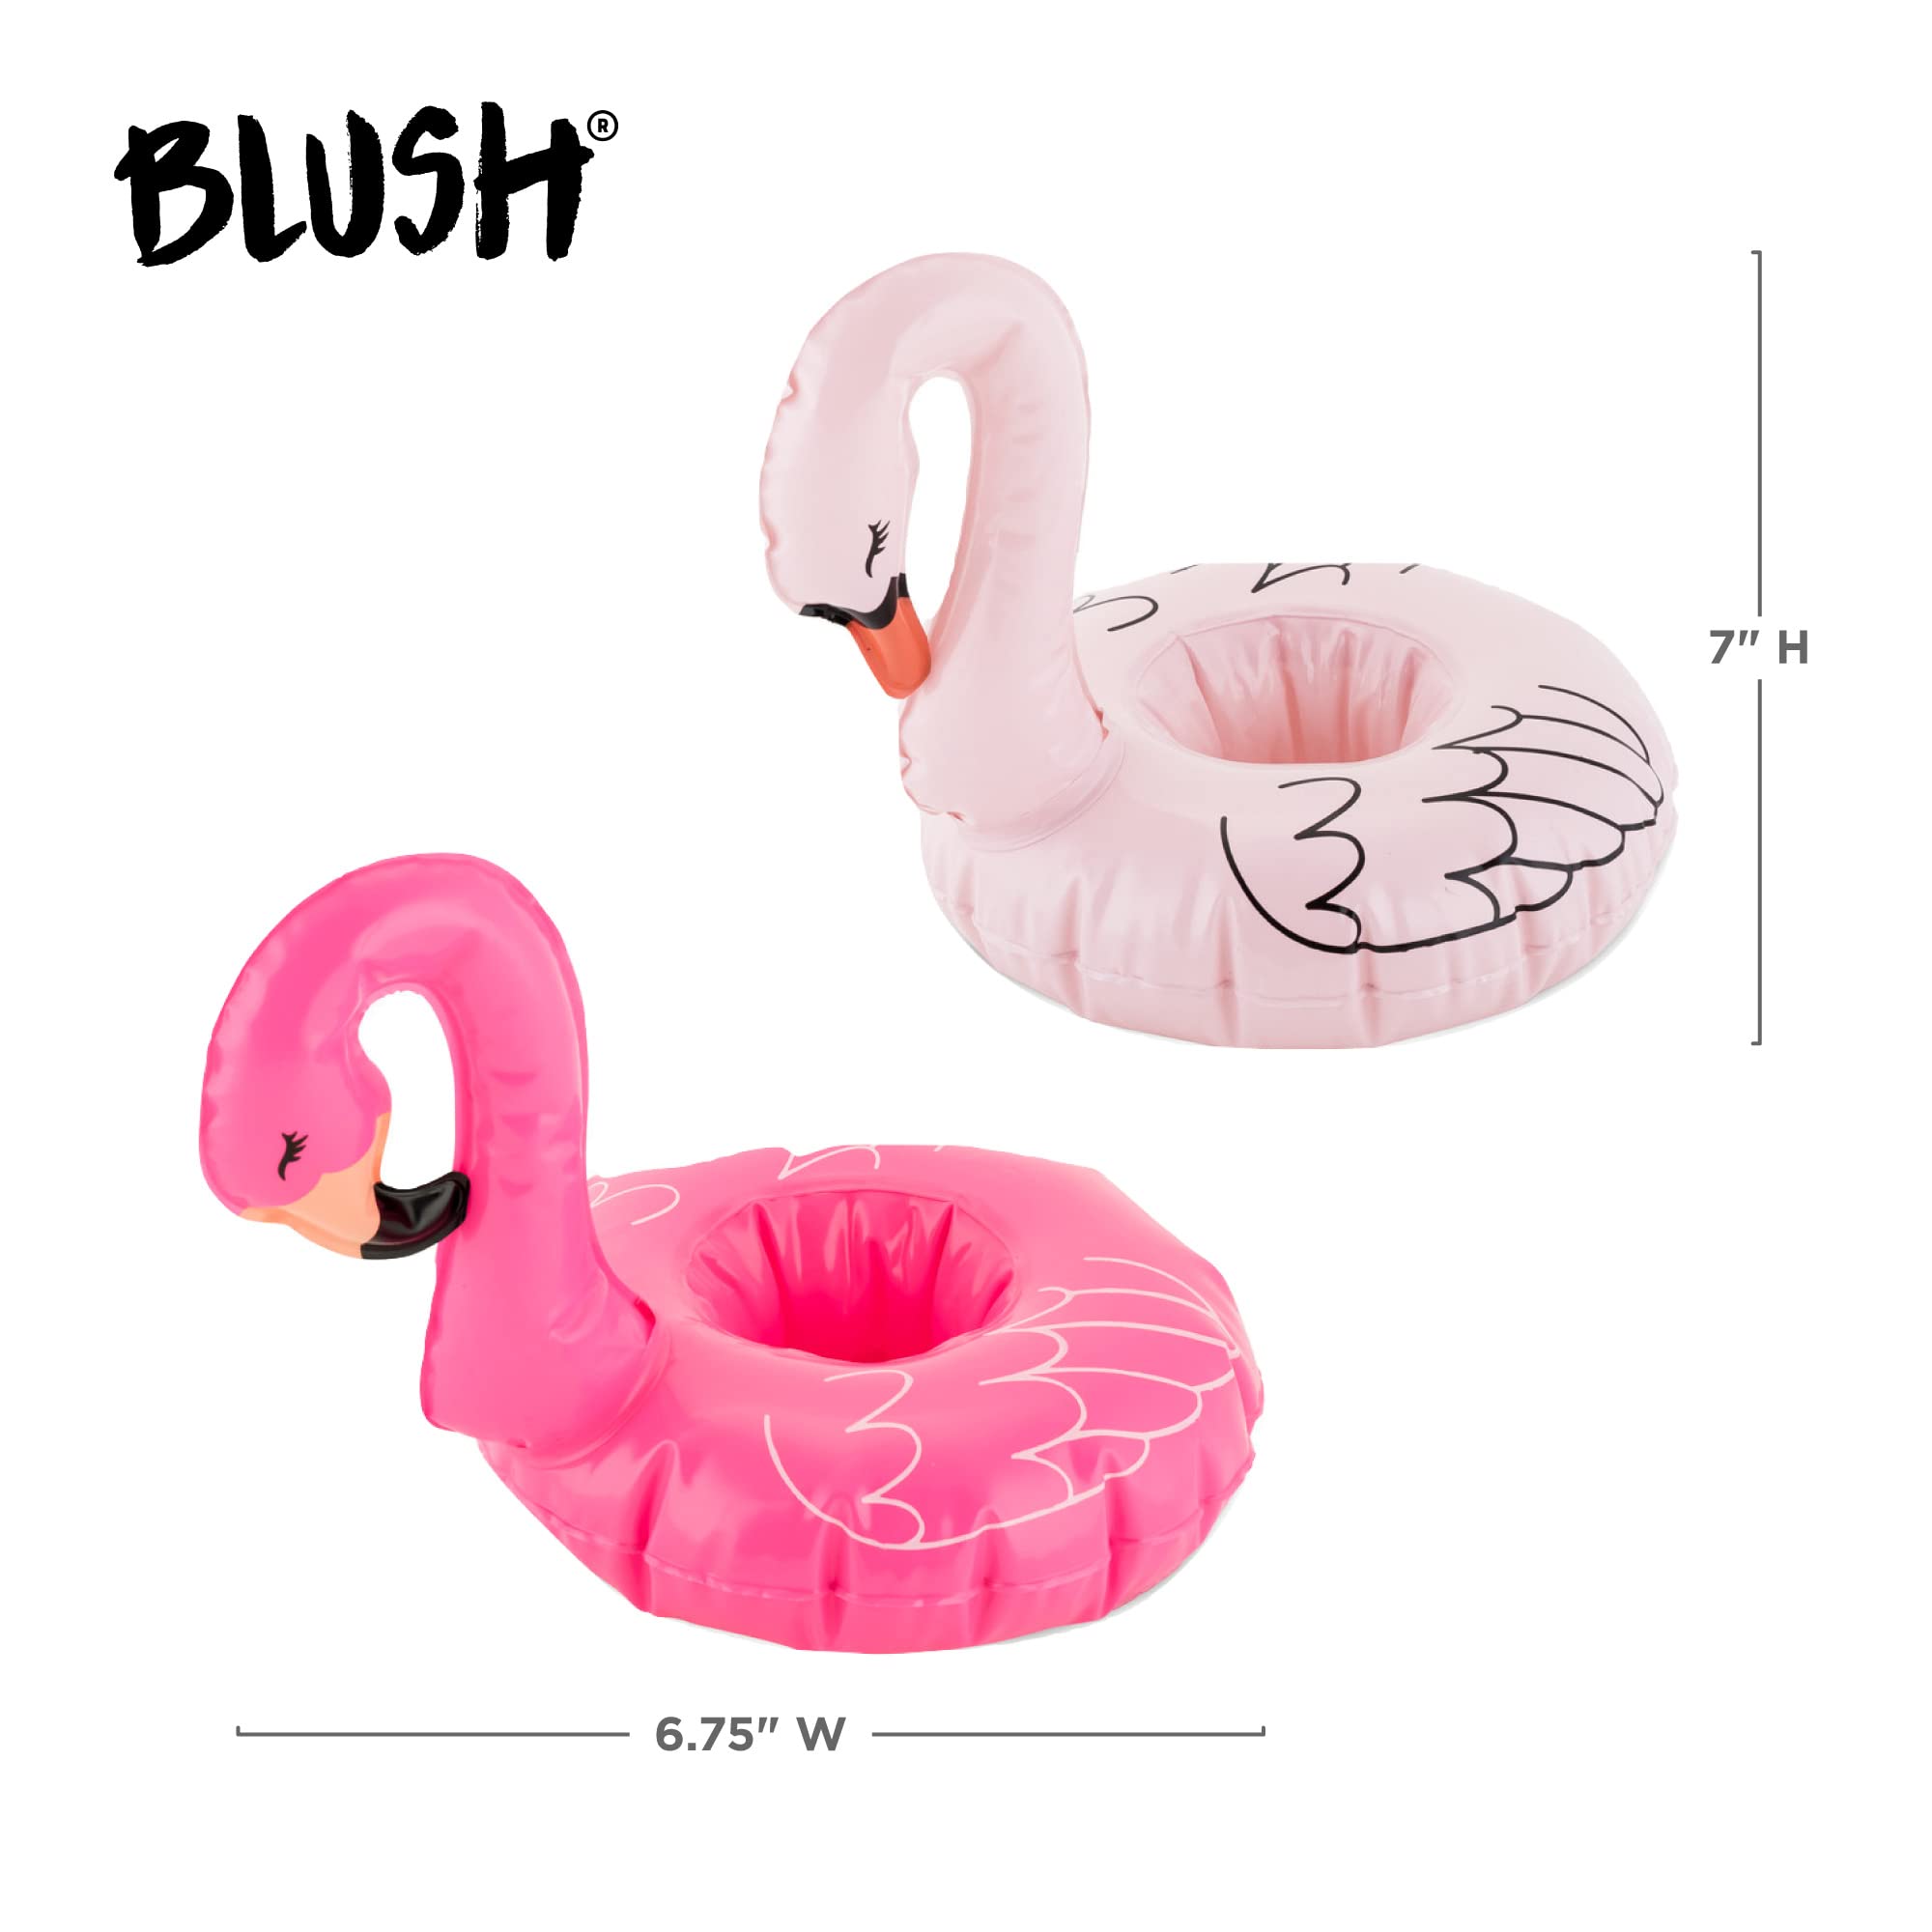 Blush Flock Drink Floaties for Standard Cups and Cans Pool Party or Beach Bird Inflatables, Pink Flamingo and Swan, Set of 2